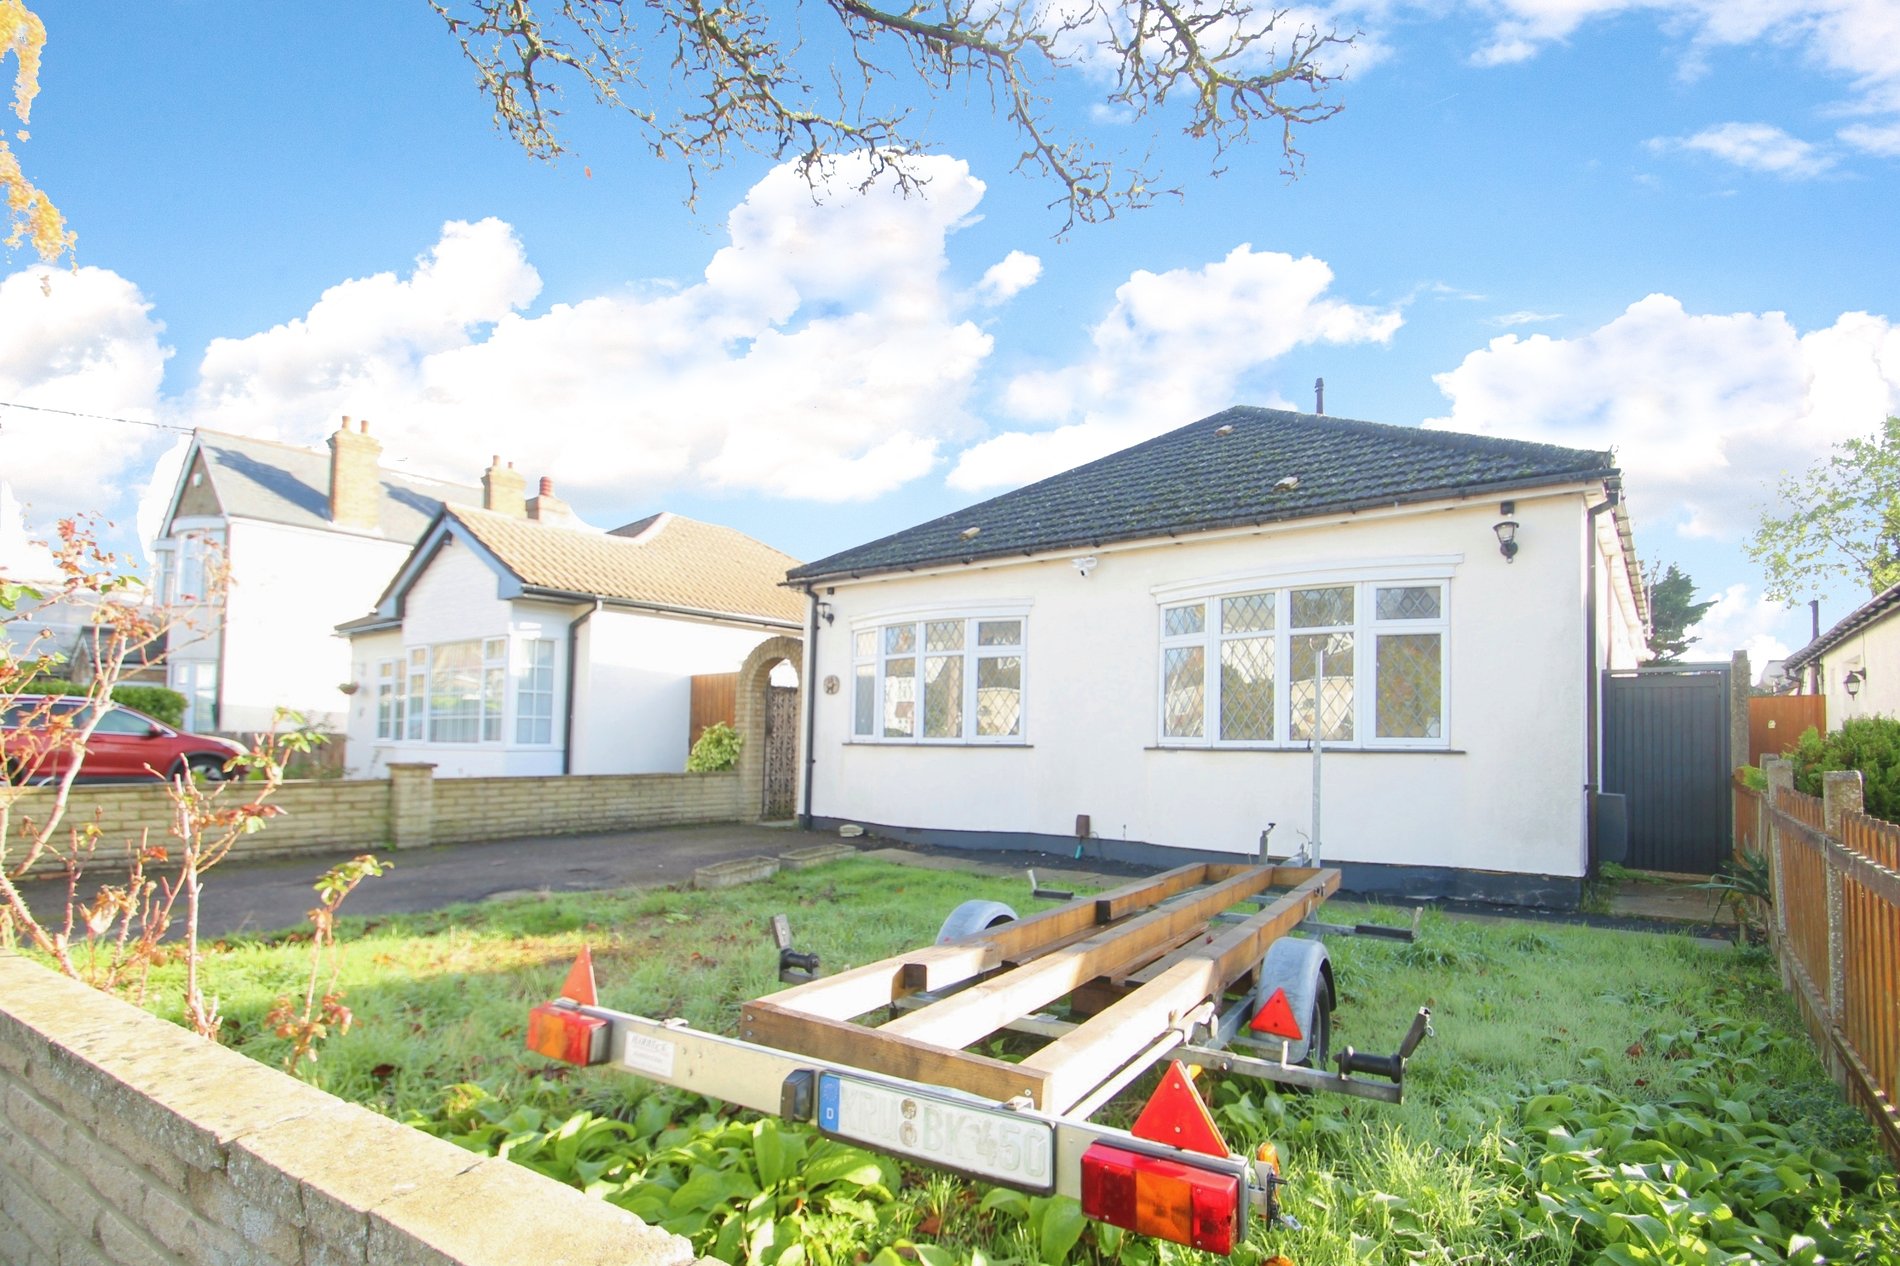 3 bed detached bungalow to rent in Ferrers Avenue, West Drayton - Property Image 1